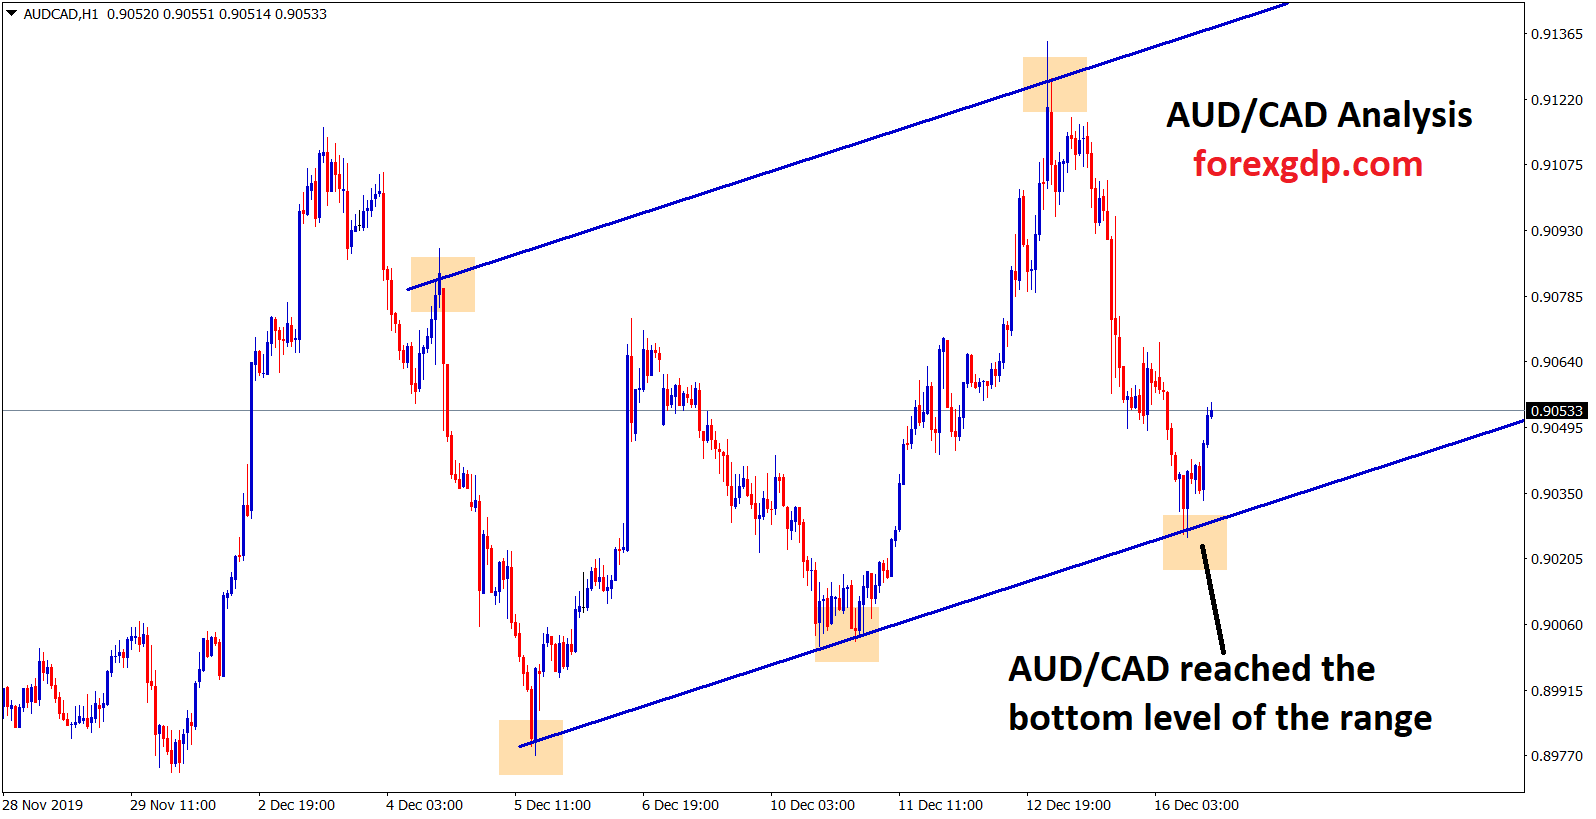 Aud cad reached the bottom level